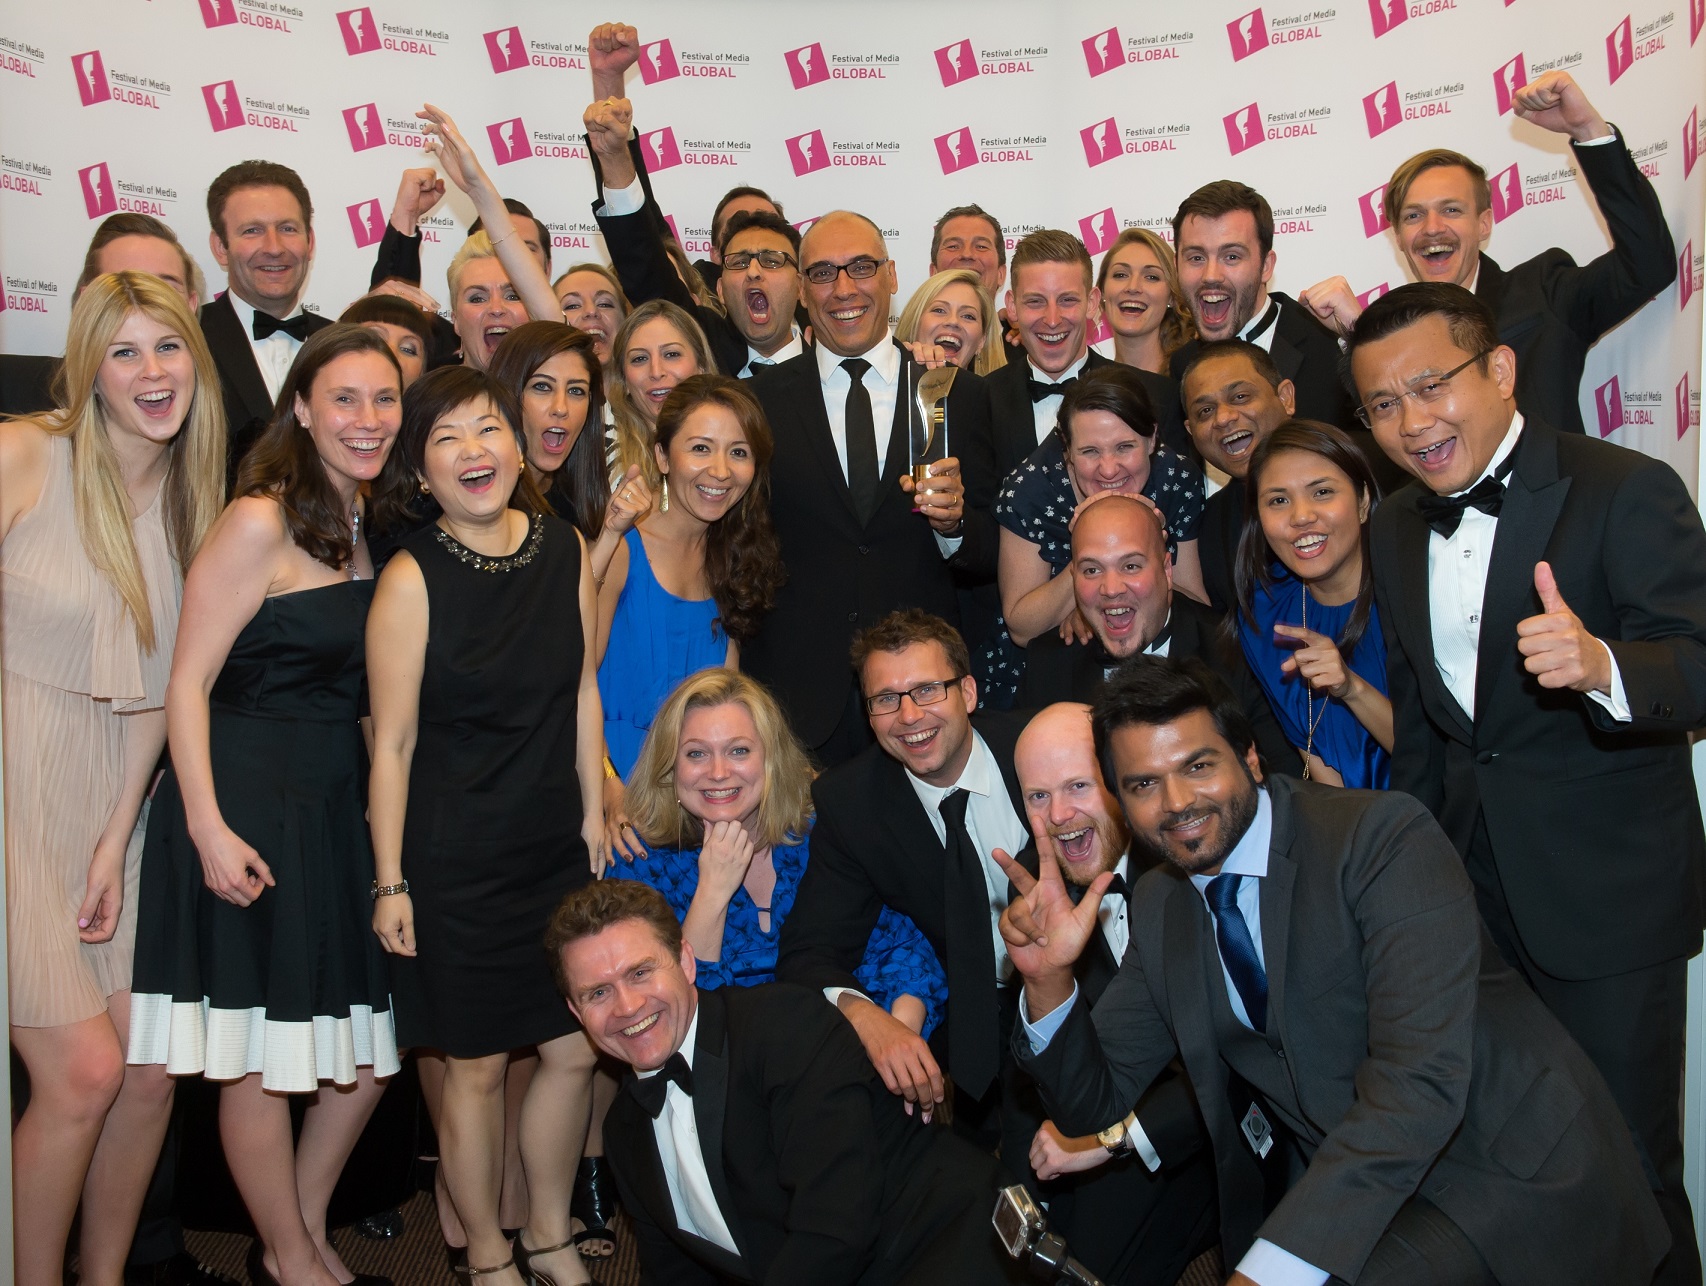 SMG named Agency Network of the Year at the Festival of Media Global Awards